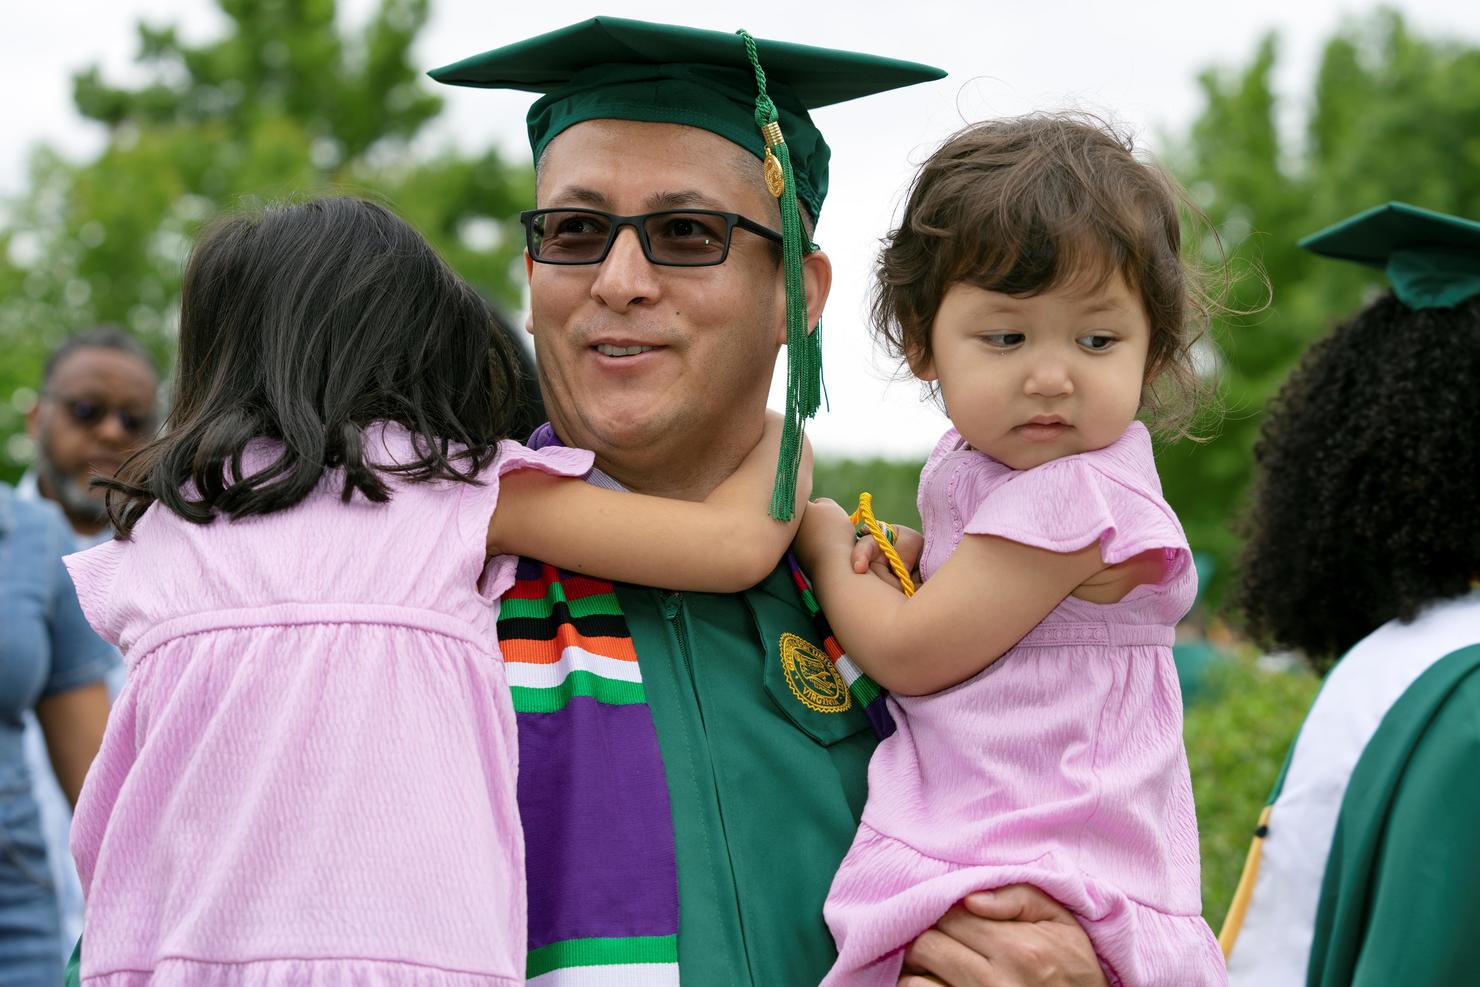 Graduate holds two young children